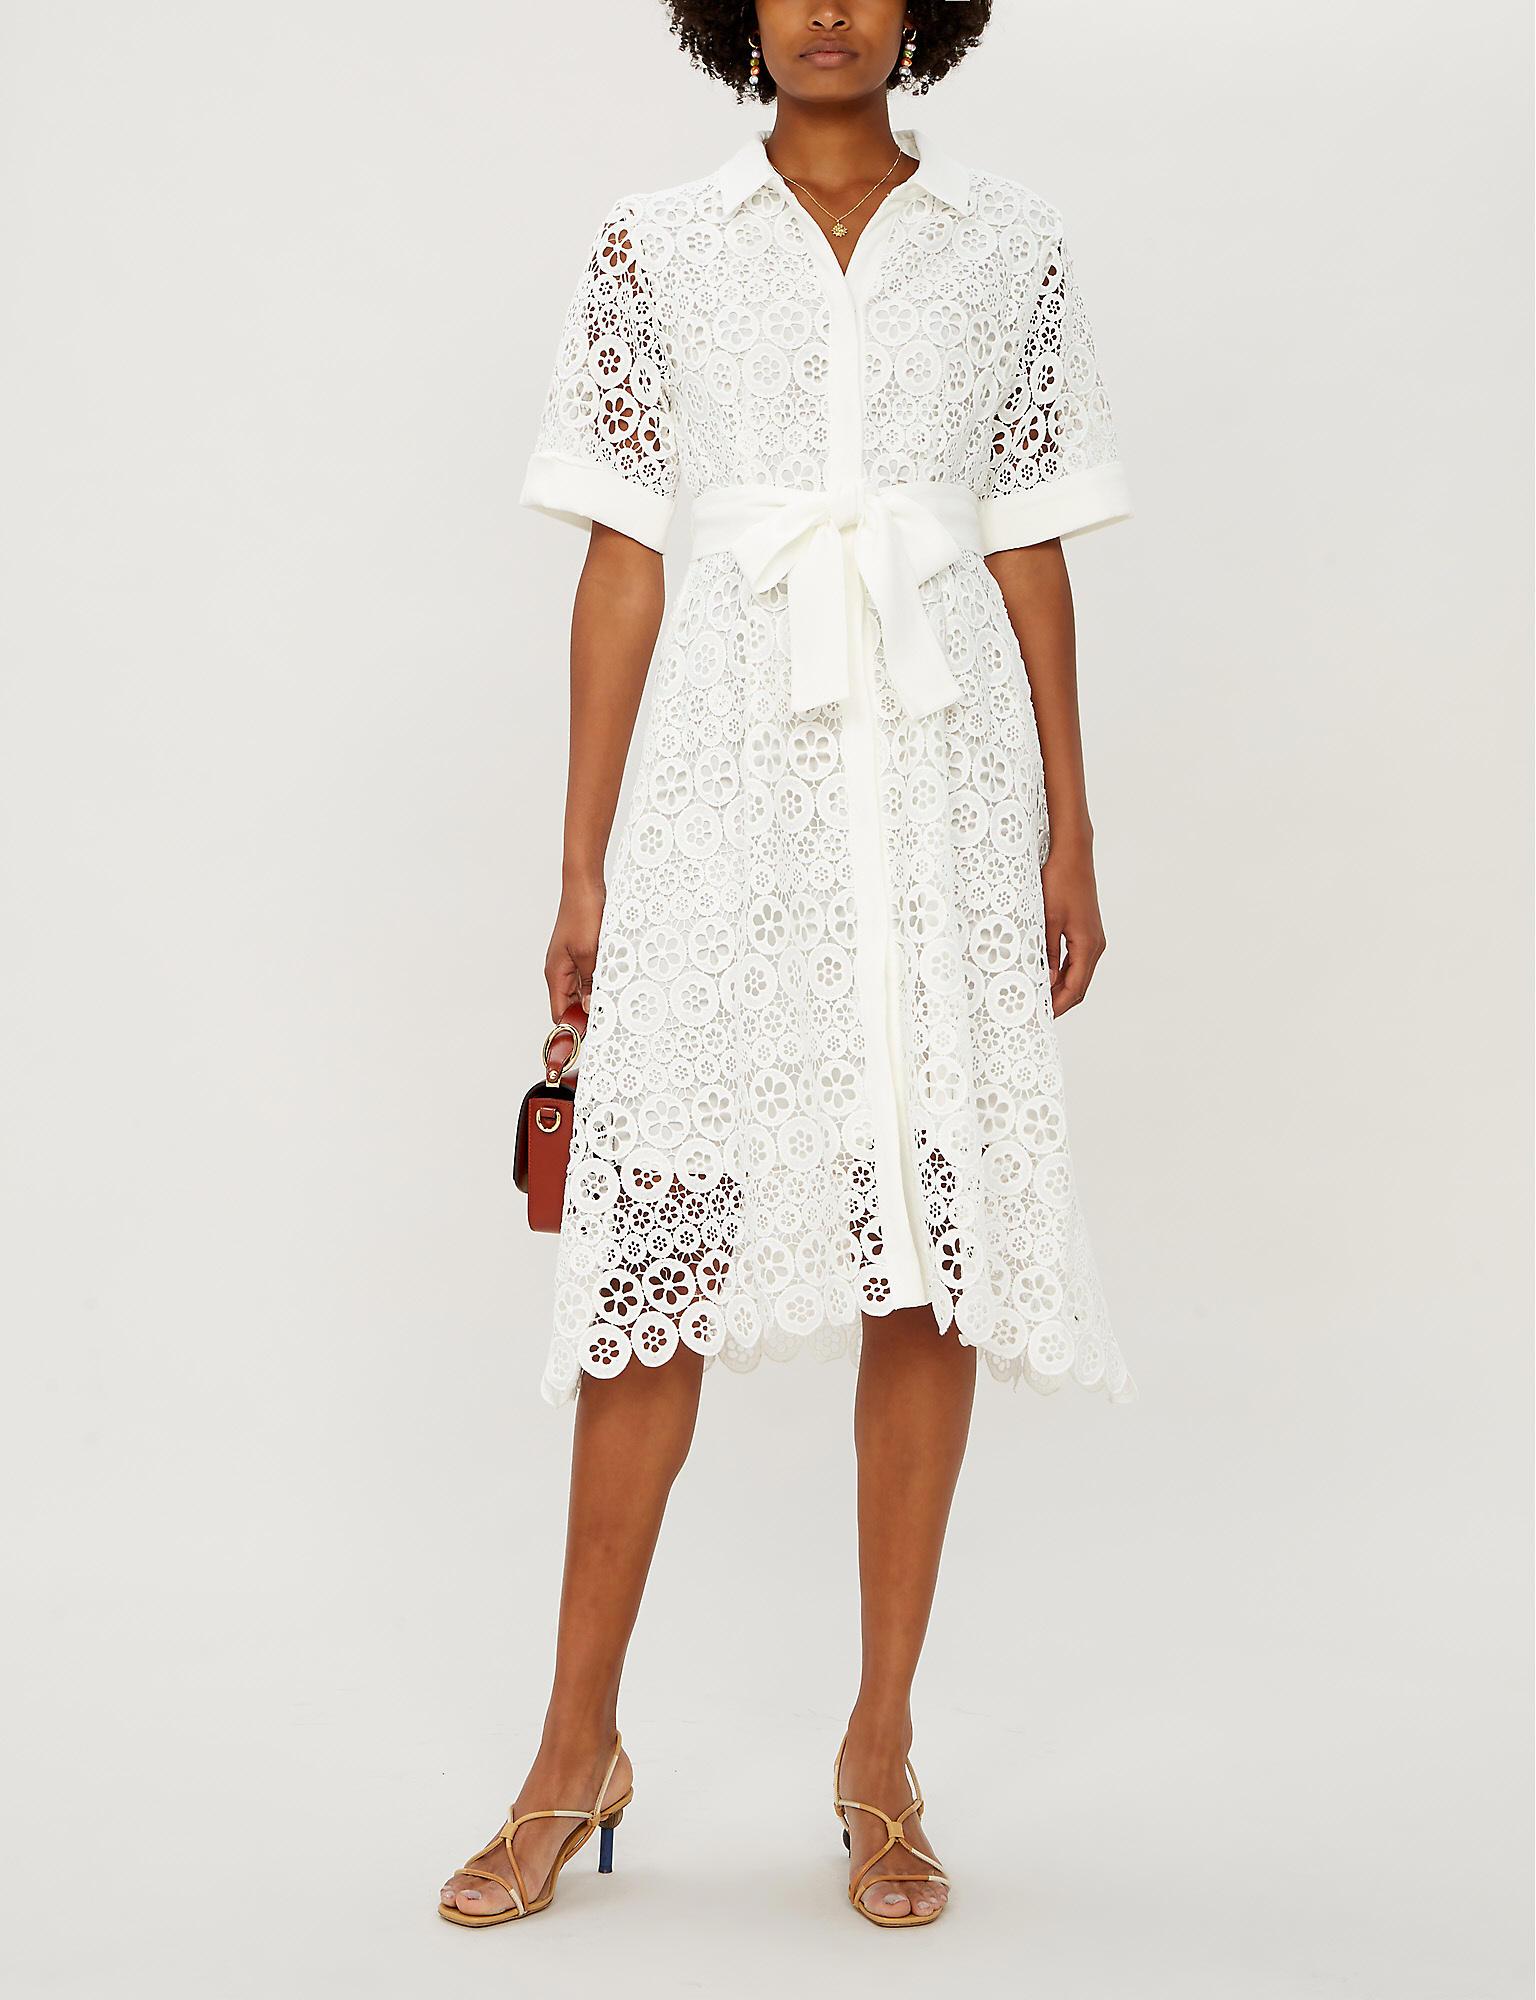 Maje Embroidered Guipure-lace Dress in White | Lyst